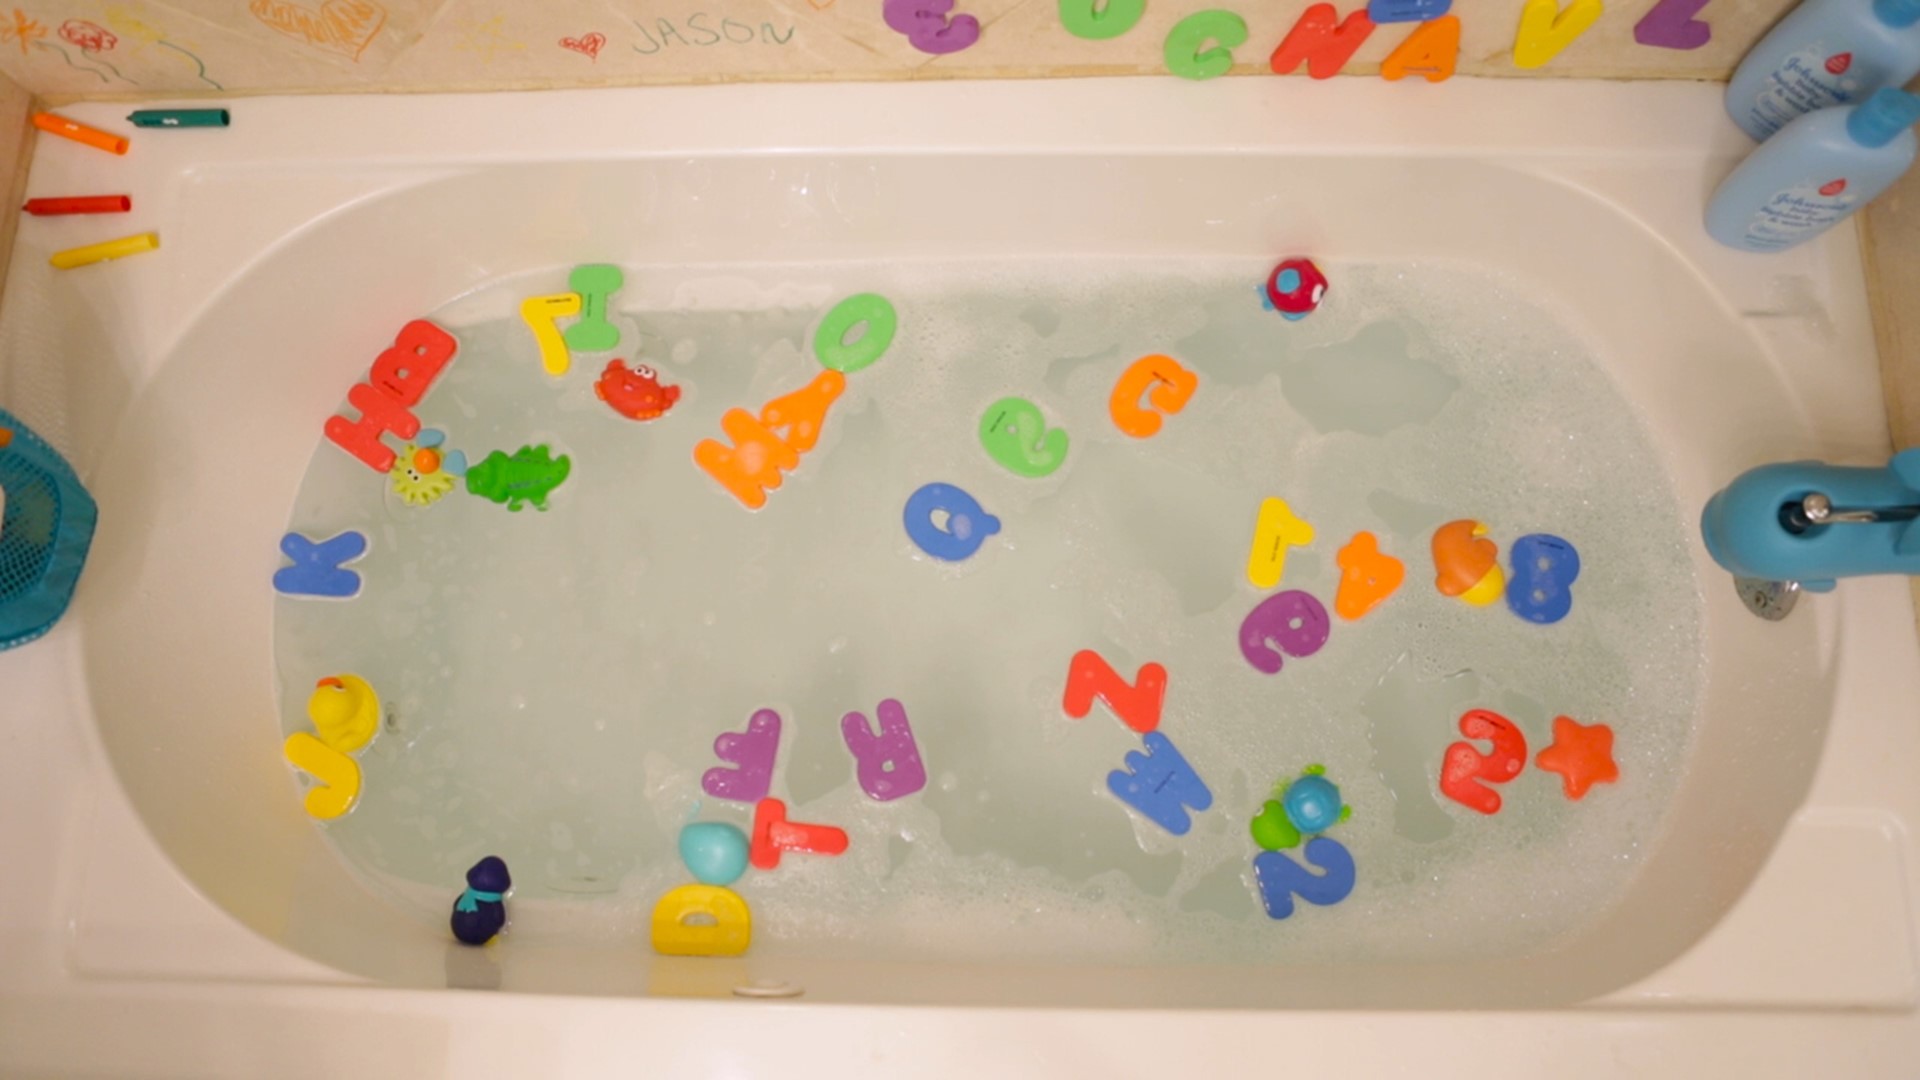 Bathtime should never be boring. From foam letters and bath crayons to a faucet cover and more... we'll show you how to keep your toddler entertained and safe in the bathtub.